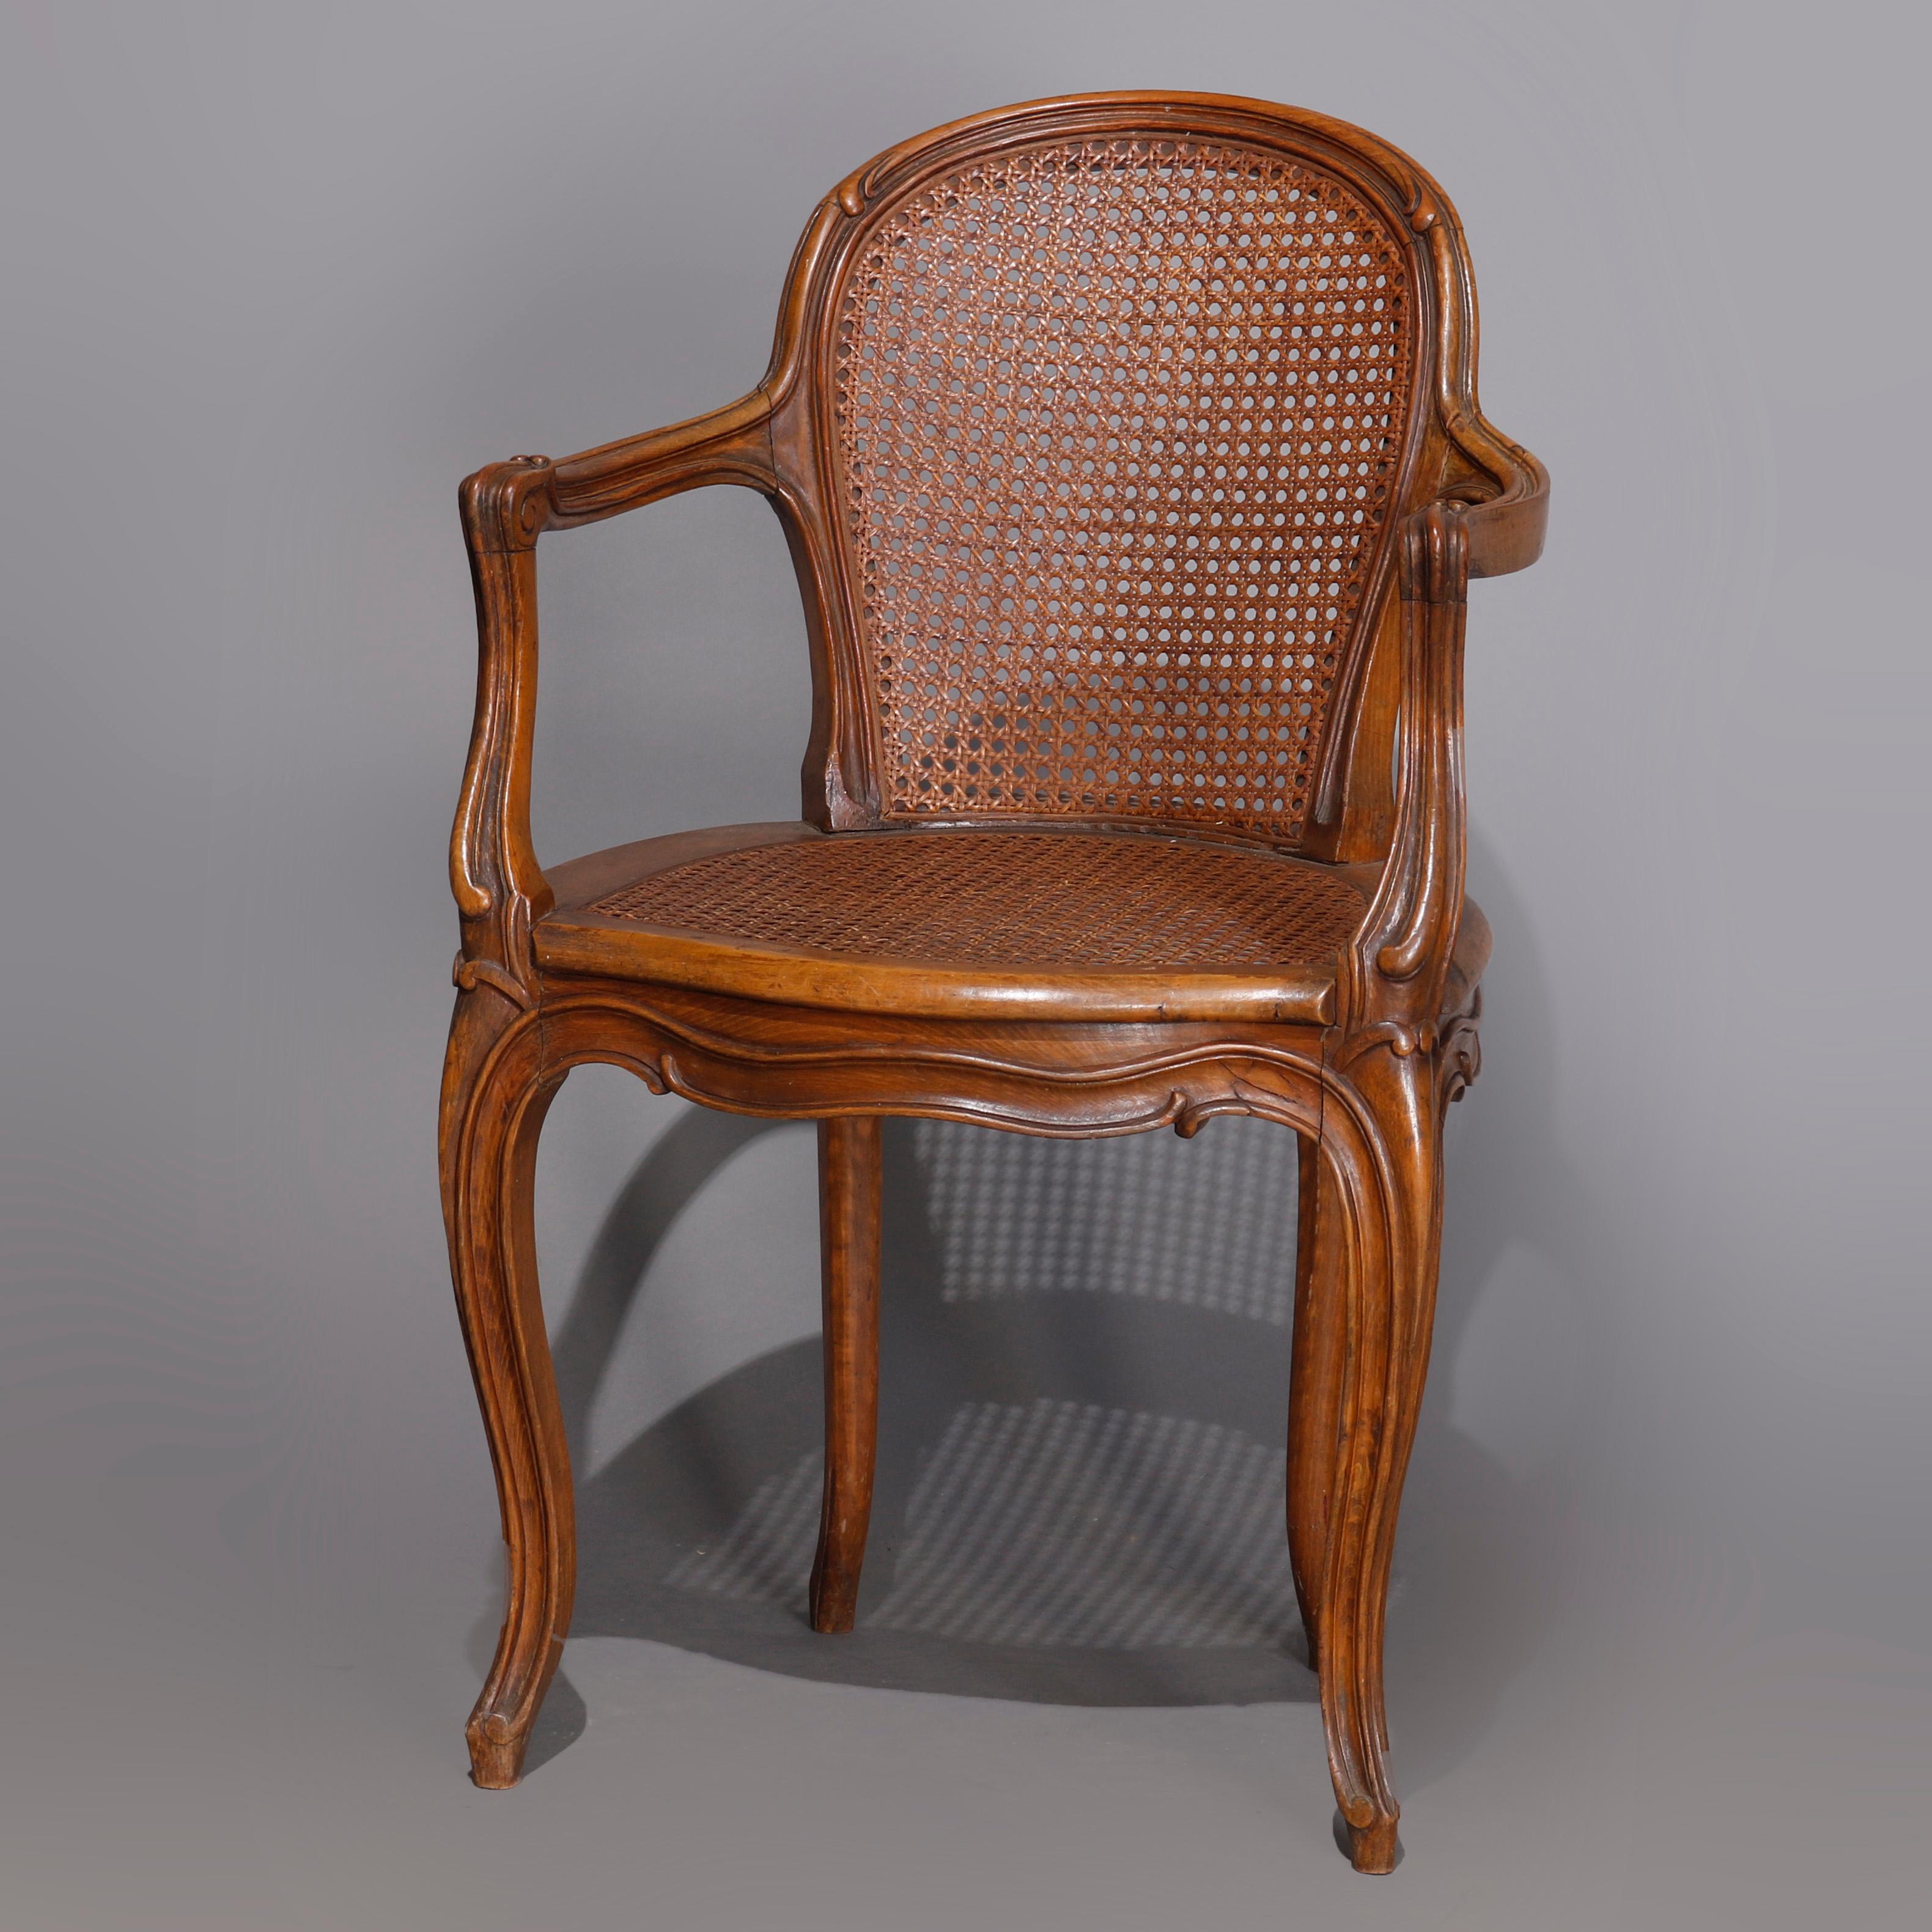 A set of four antique French Louis XVI armchairs offer carved walnut scroll form frames with curved backs raised on cabriole legs, having caned seats and backs, 19th century

***DELIVERY NOTICE – Due to COVID-19 we are employing NO-CONTACT PRACTICES